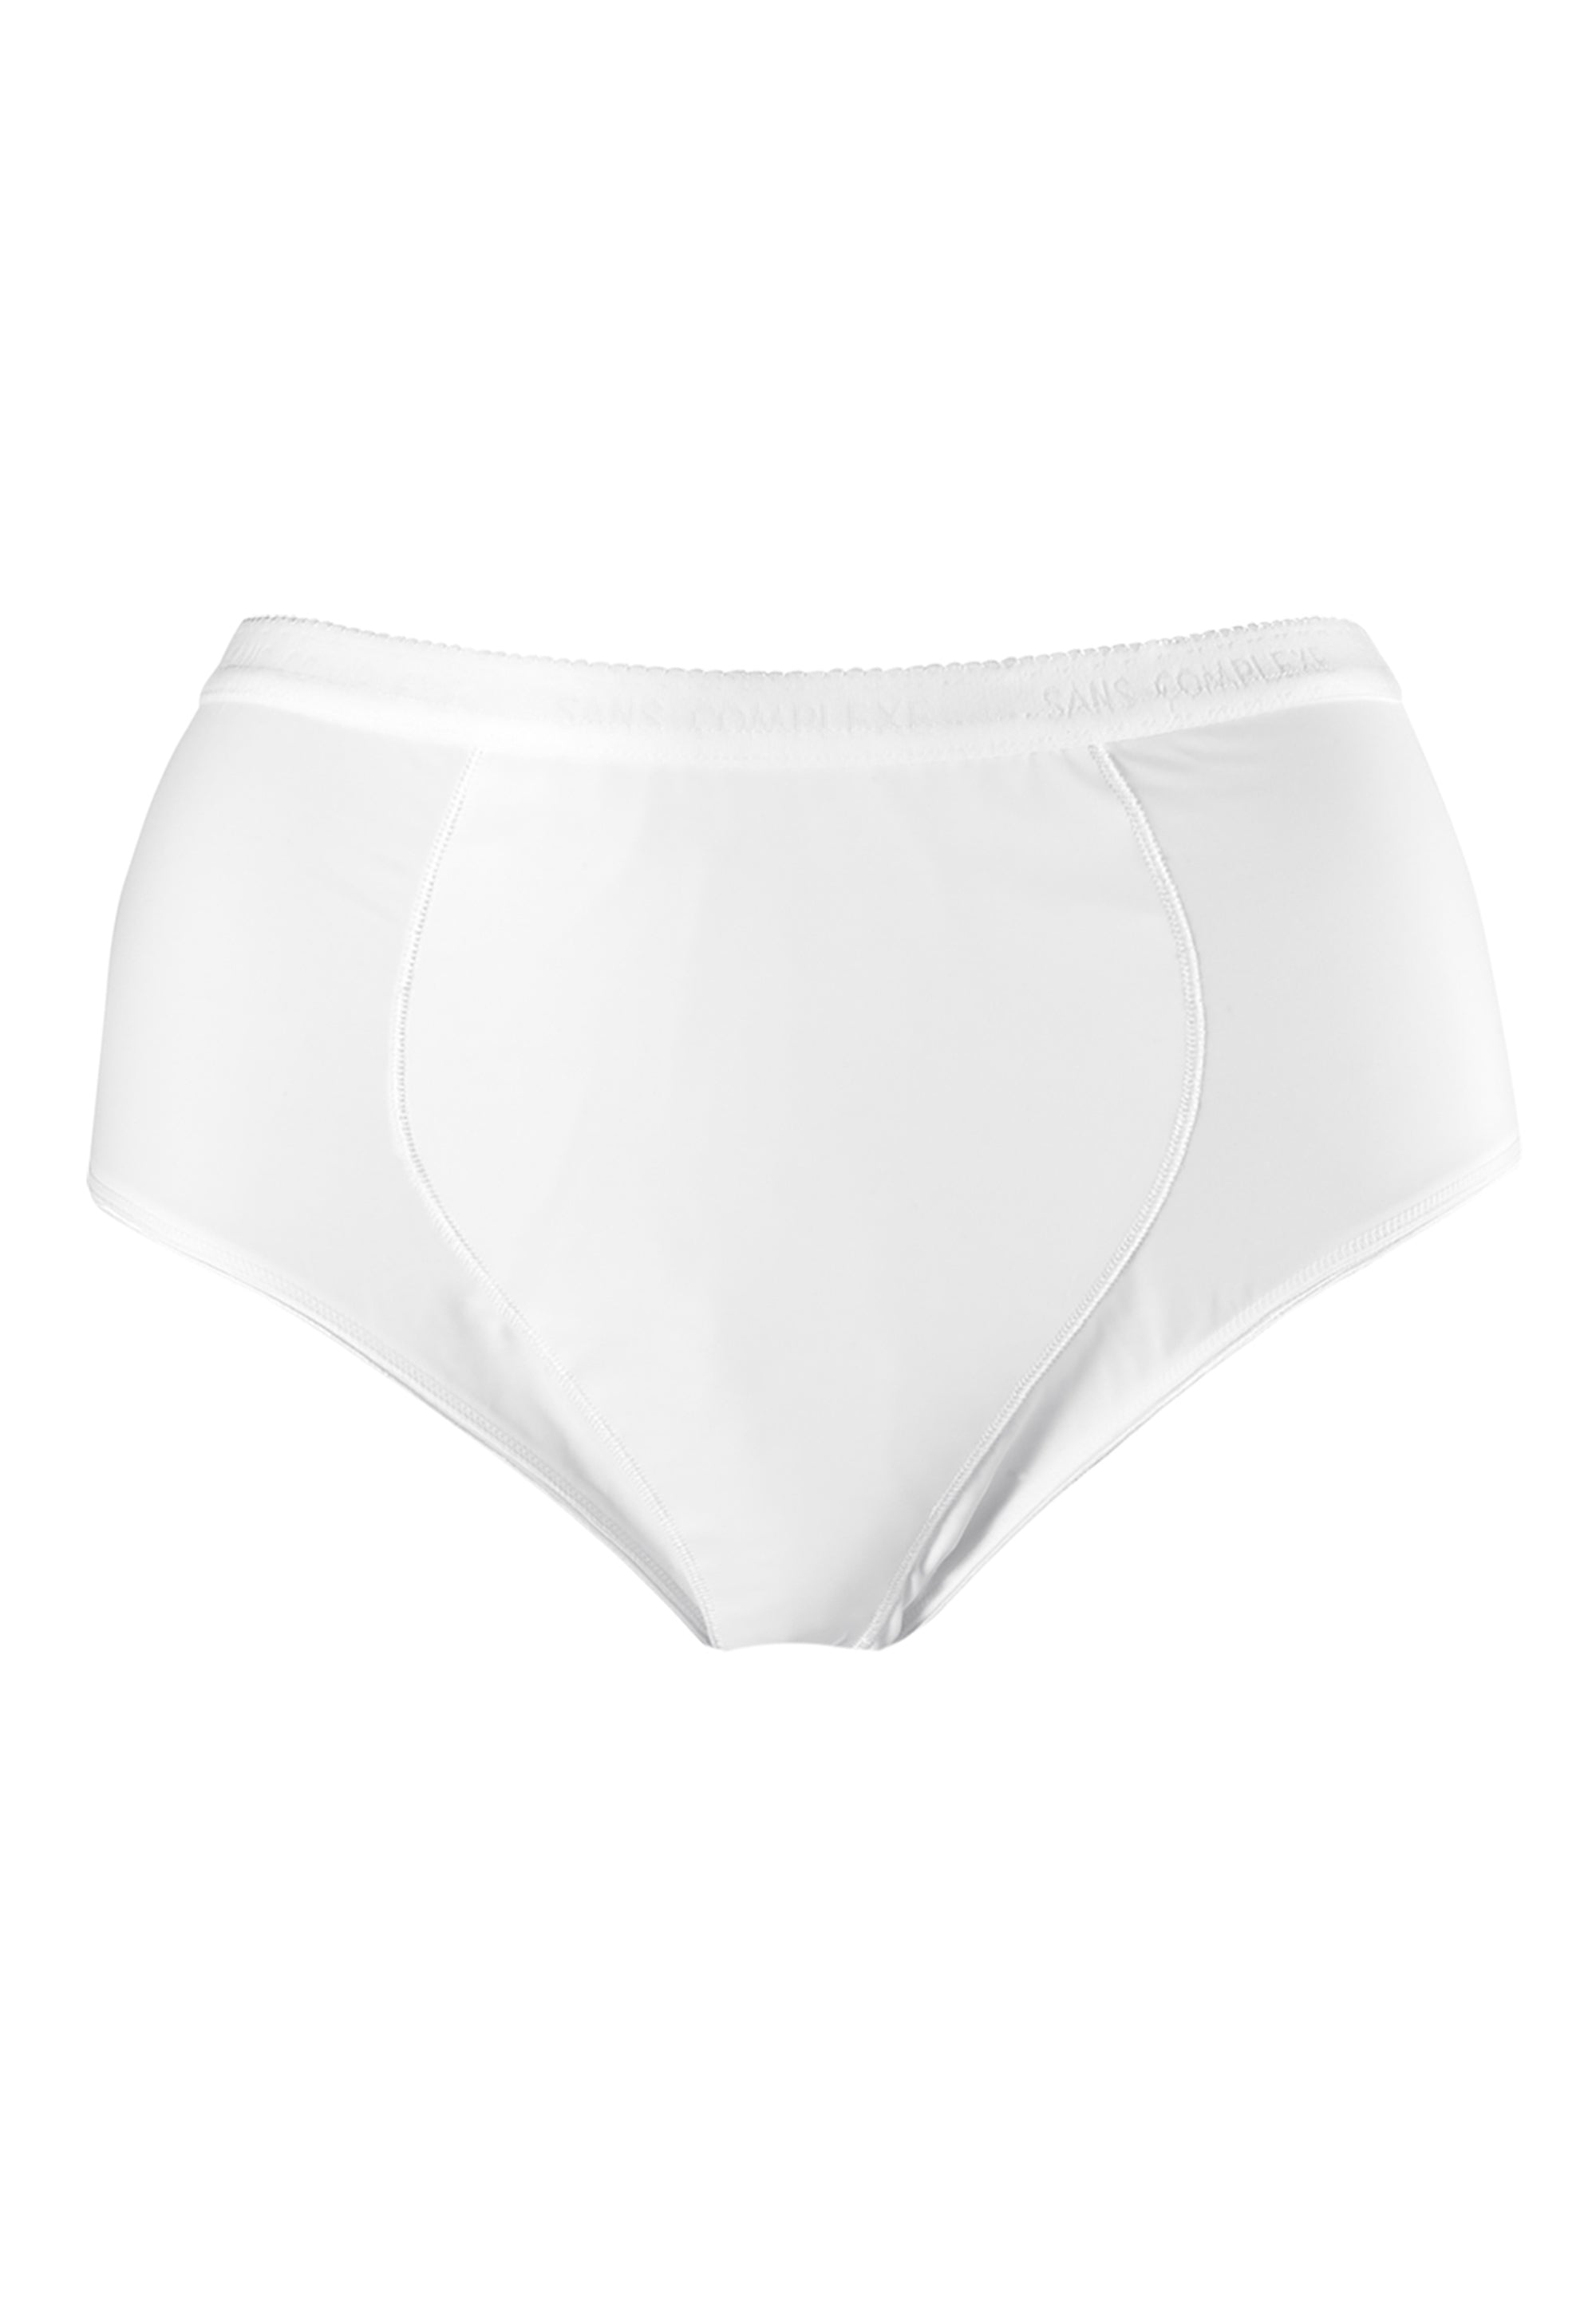 Underworks Womens Padded Rear Lift Brief - White - S